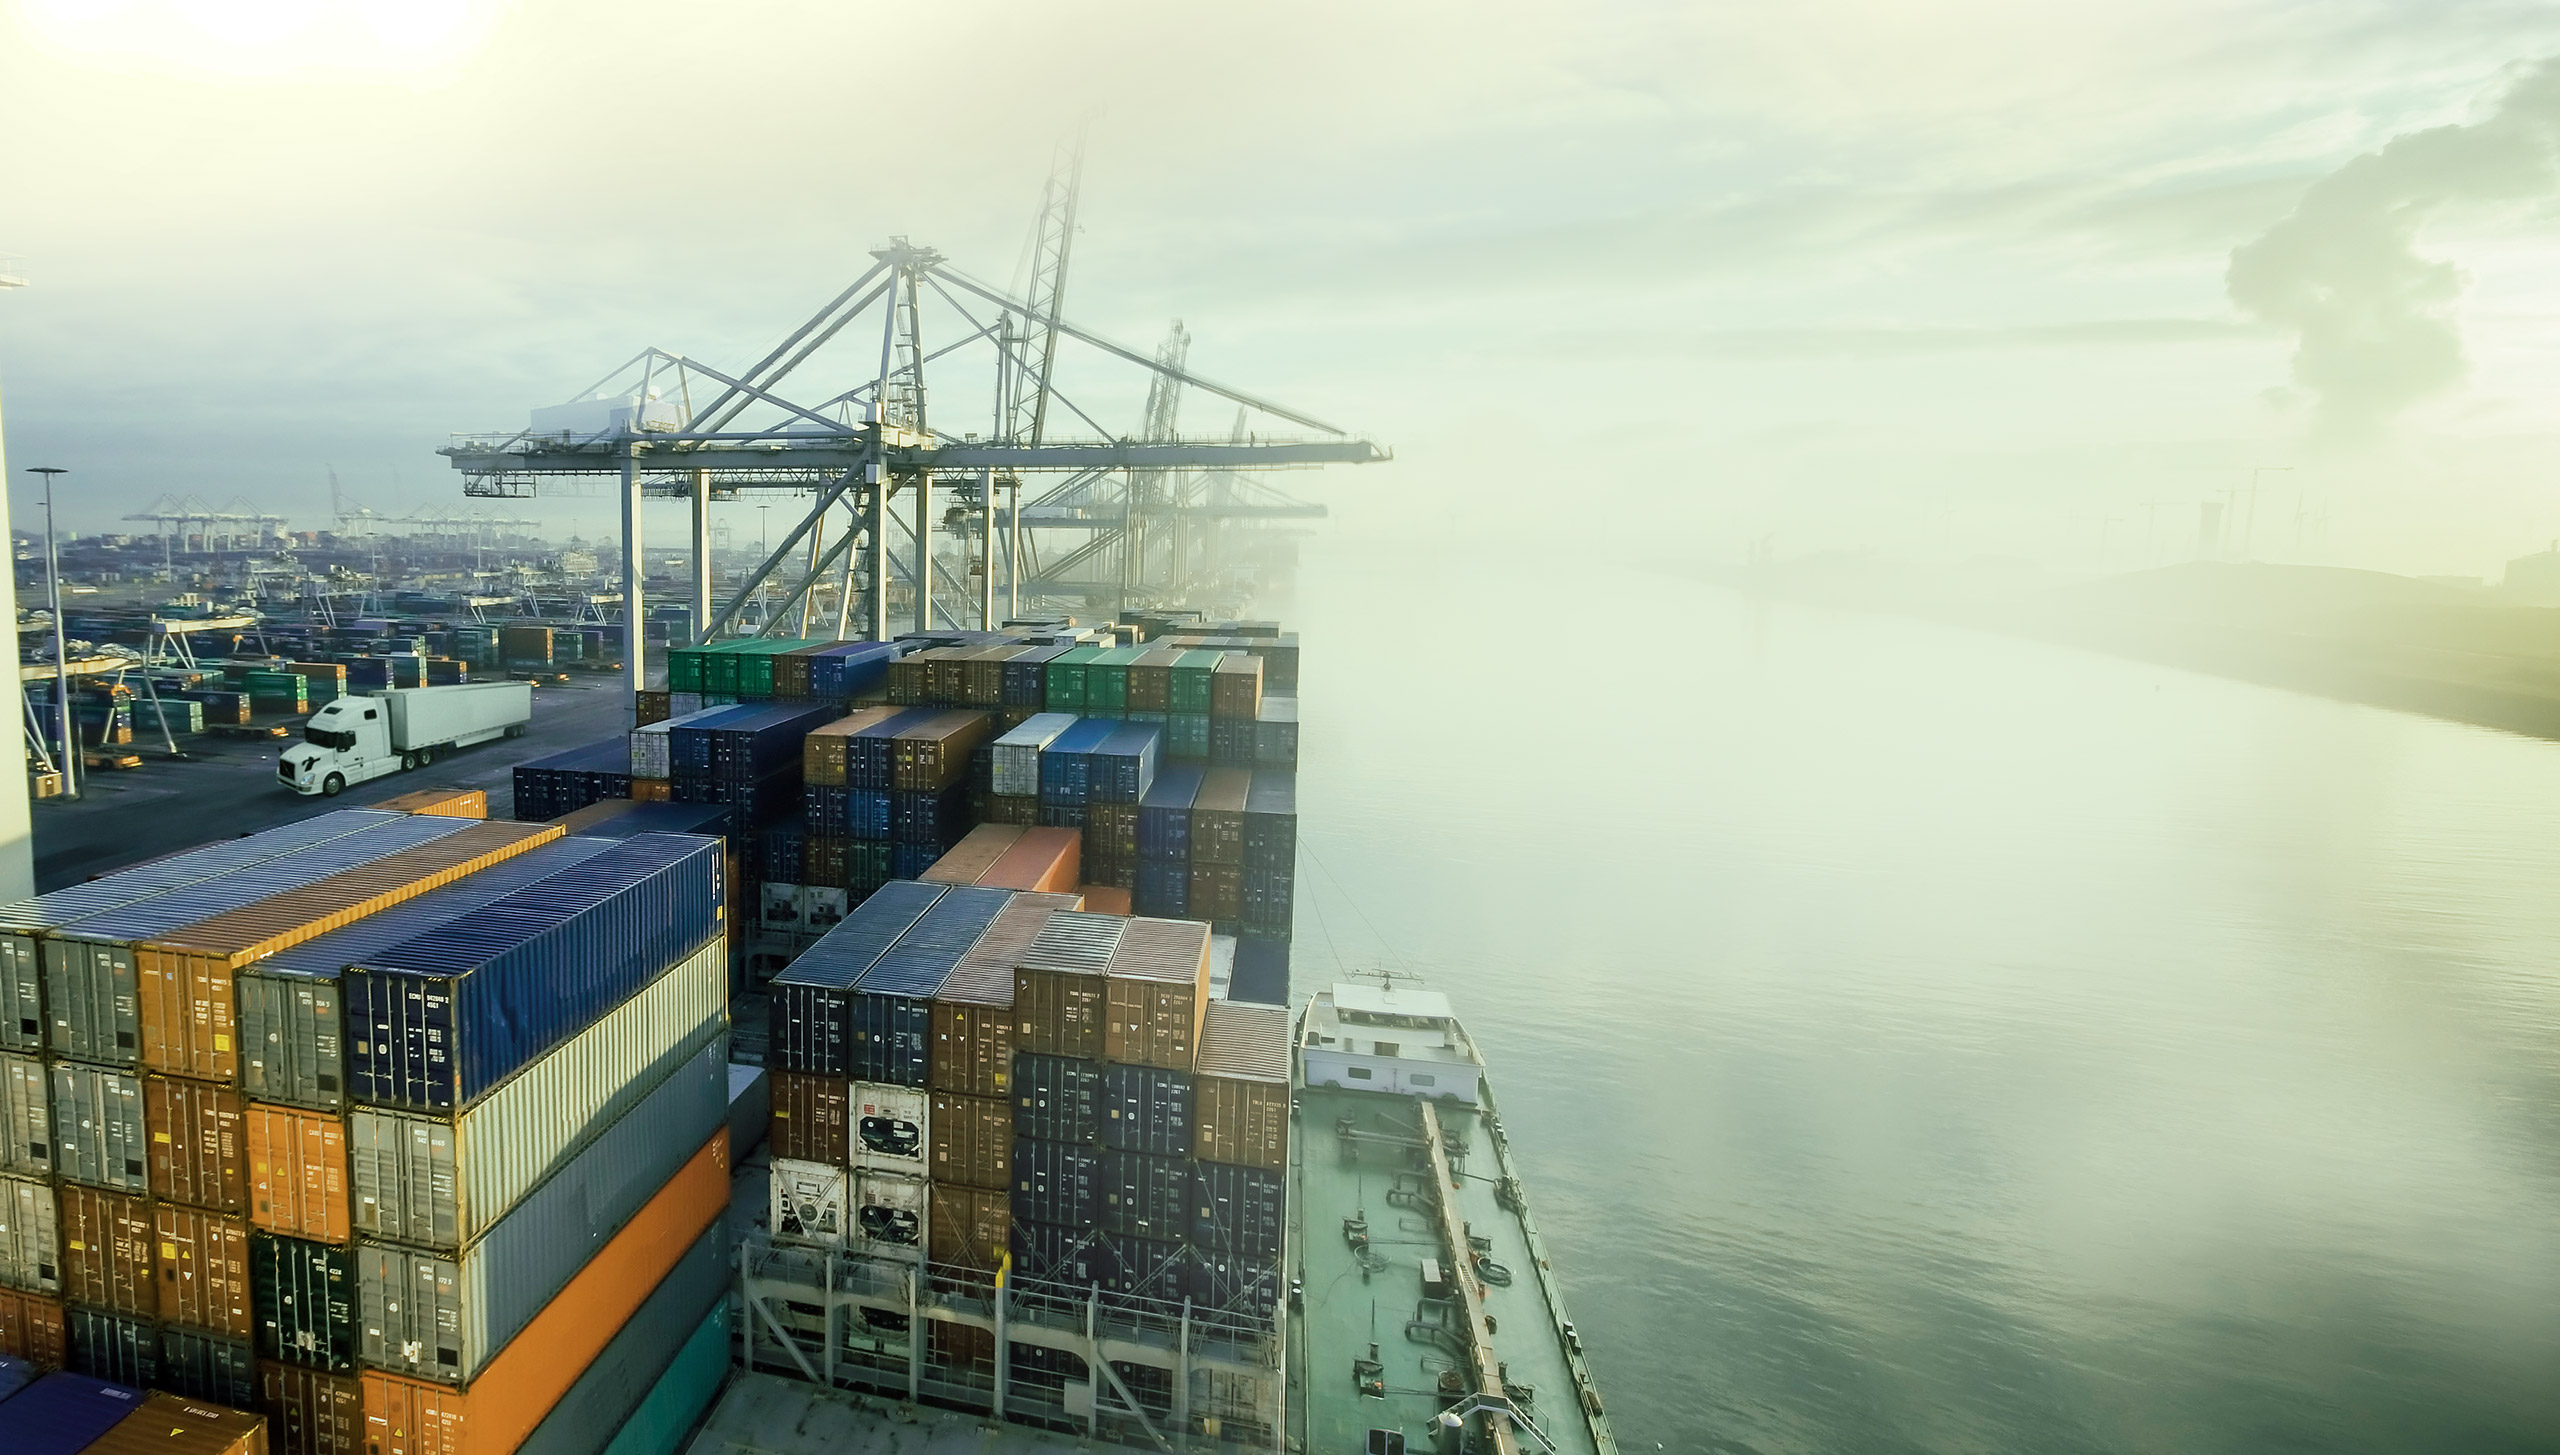 An ocean port with cargo ships, freight containers, cranes and a transport truck